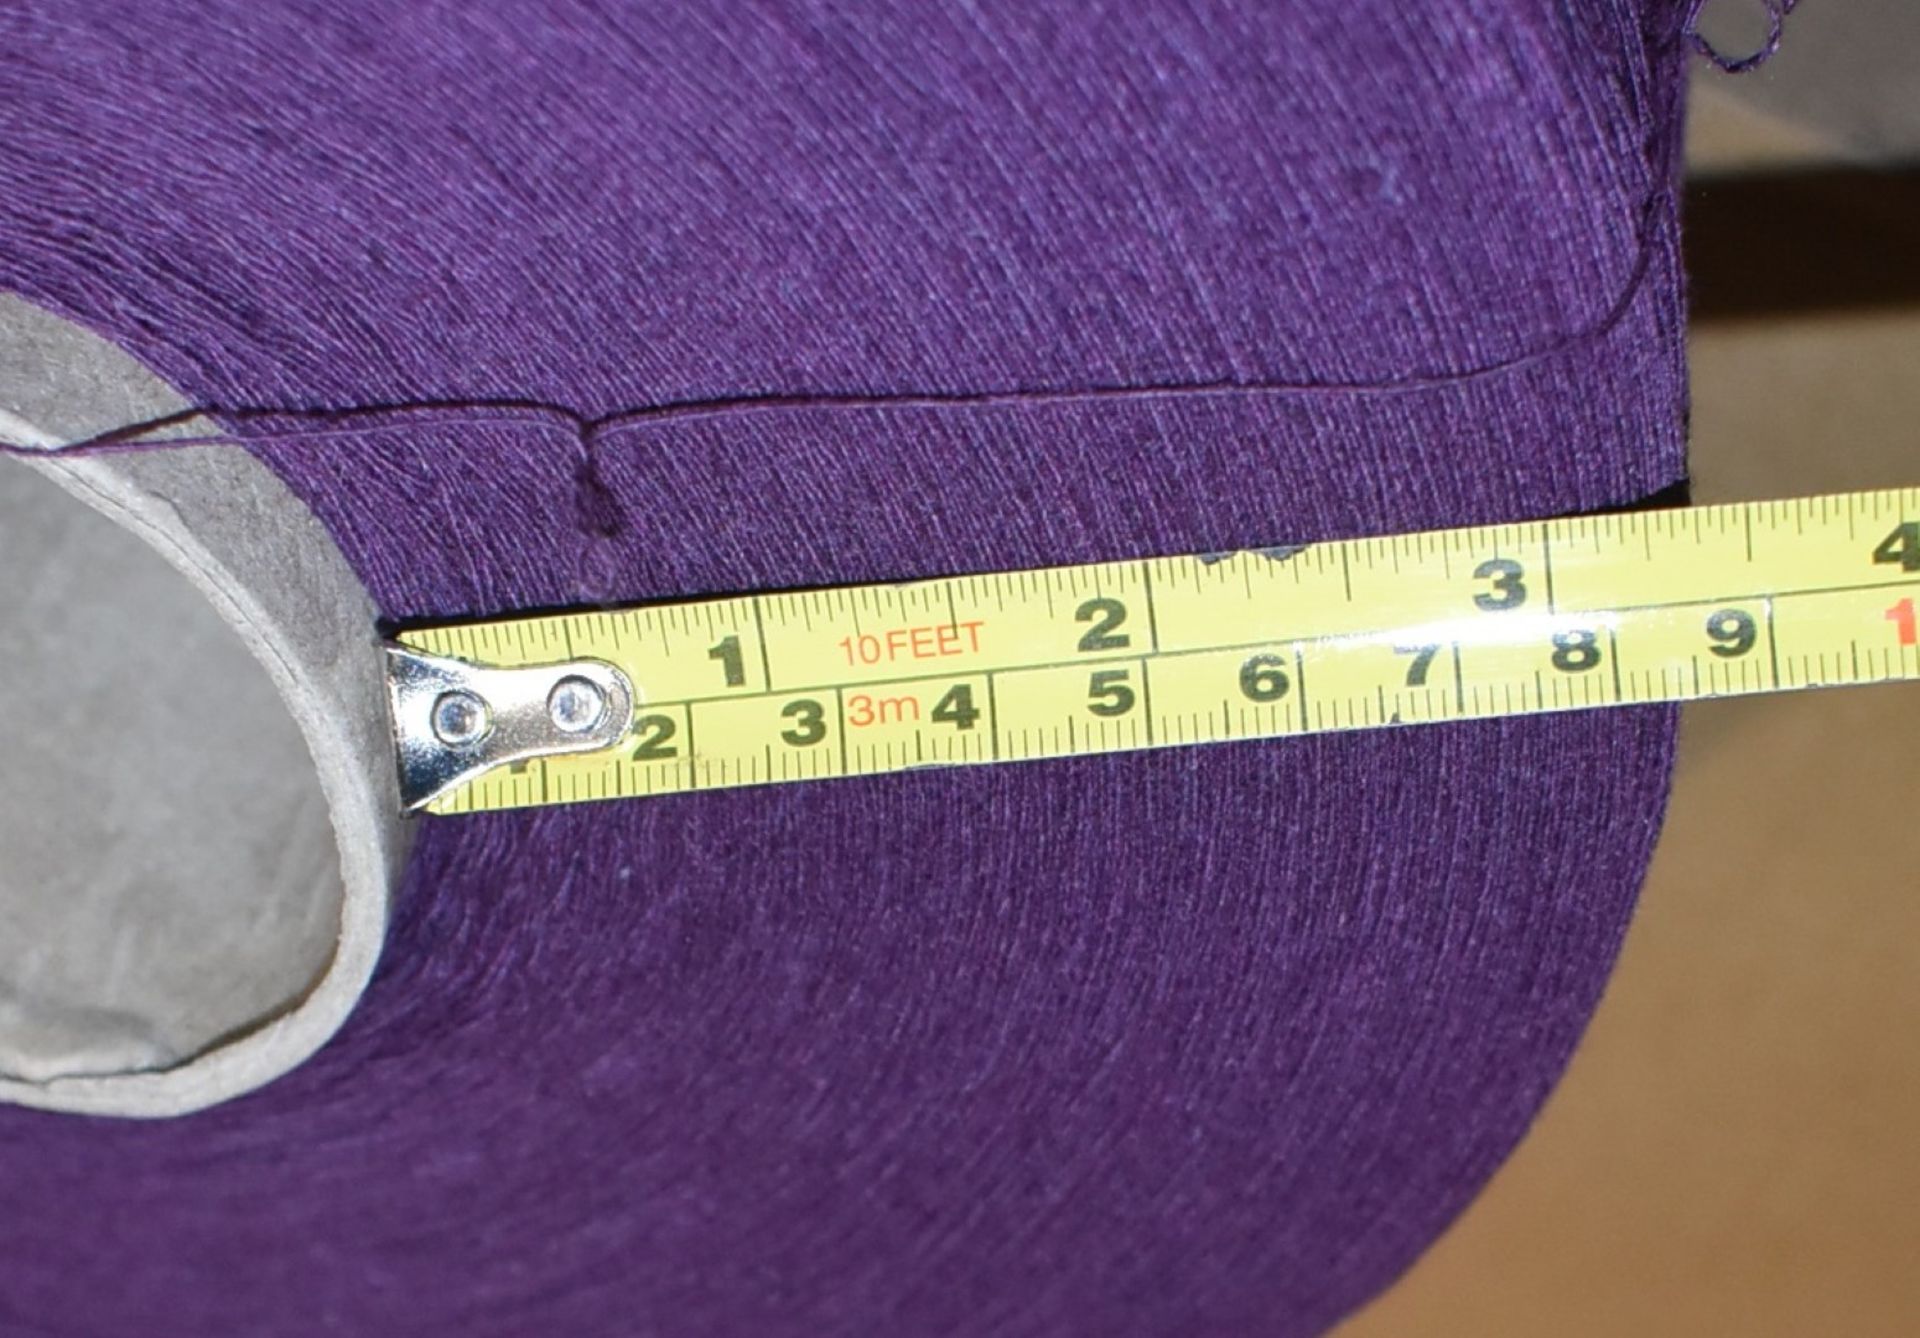 6 x Cones of 1/13 MicroCotton Knitting Yarn - Purple - Approx Weight: 2,300g - New Stock ABL Yarn - Image 9 of 9